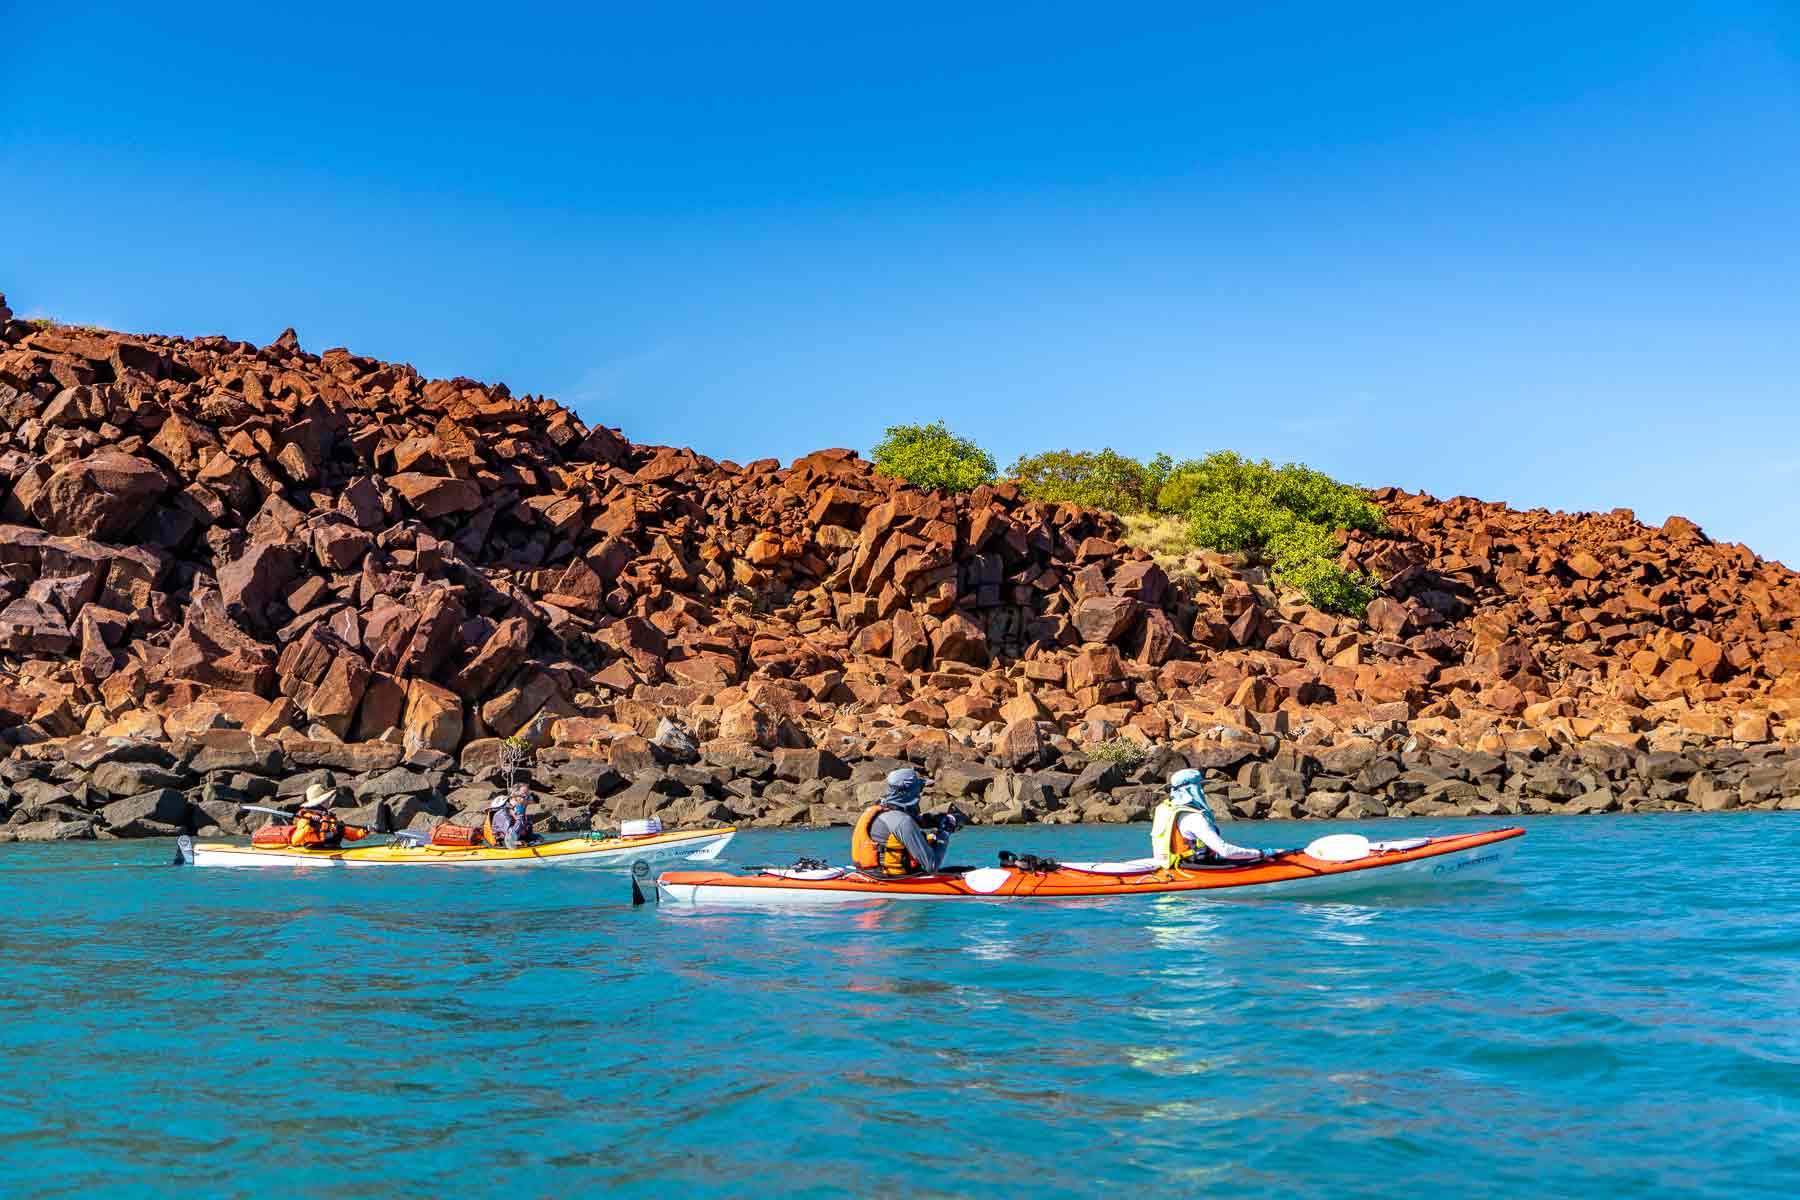 Sea kayaking amongst a natural rock pile, adorned with ancient petroglyphs